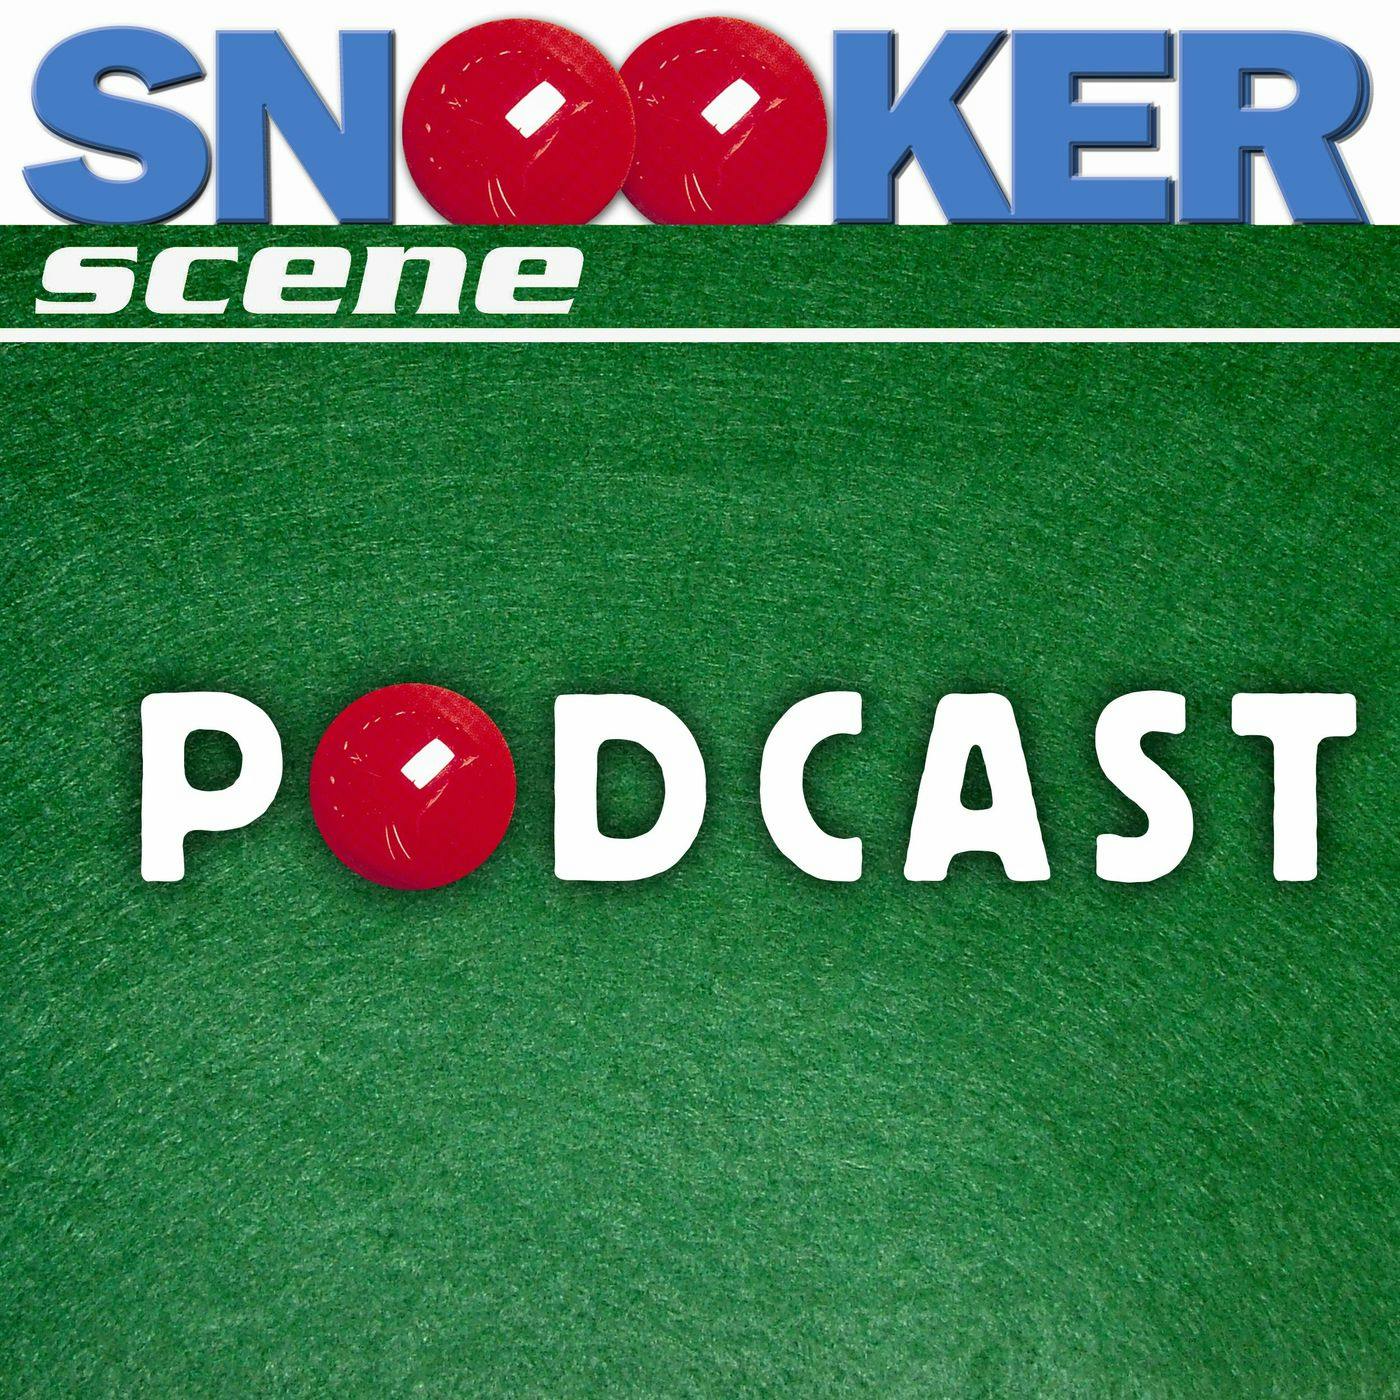 Snooker Scene Podcast episode 125 - Your Questions Answered